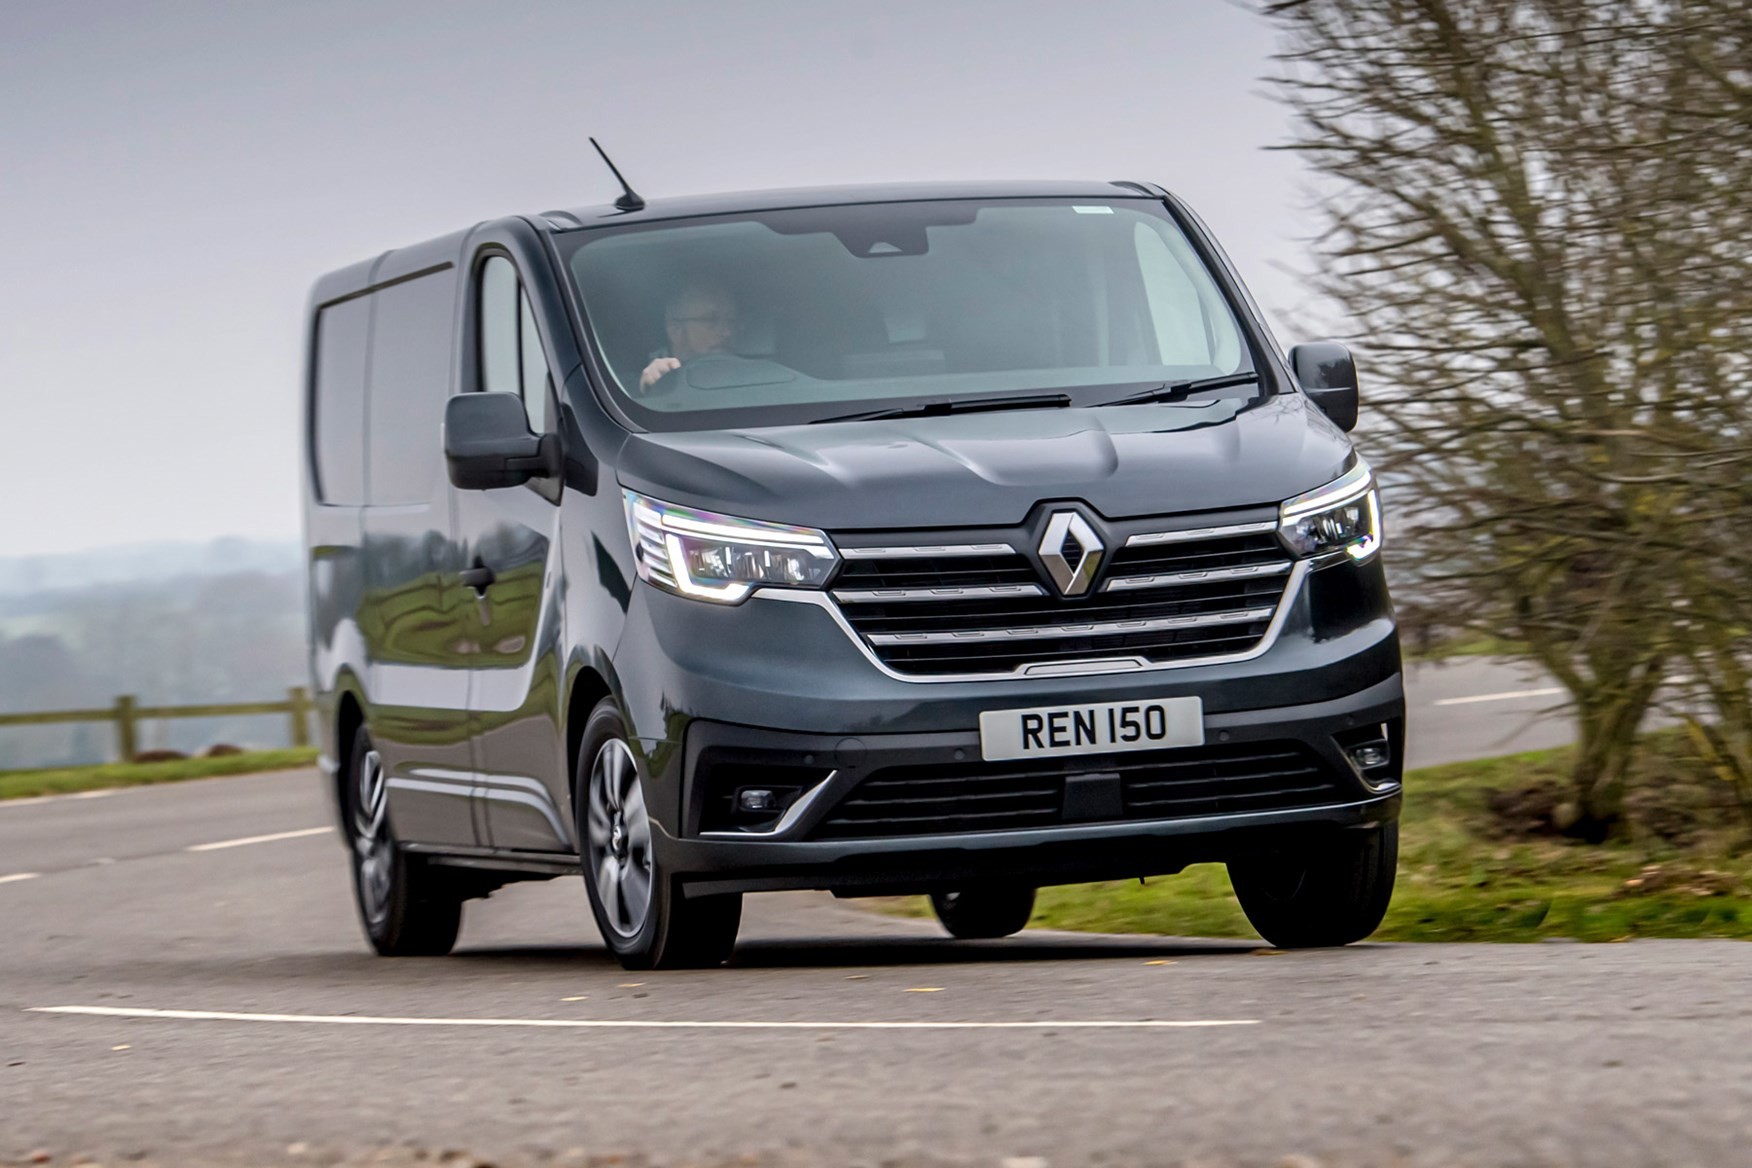 https://loadsofvans.com/images/123/1/16455265406214be0cabb77_049-renault-trafic-review.jpg